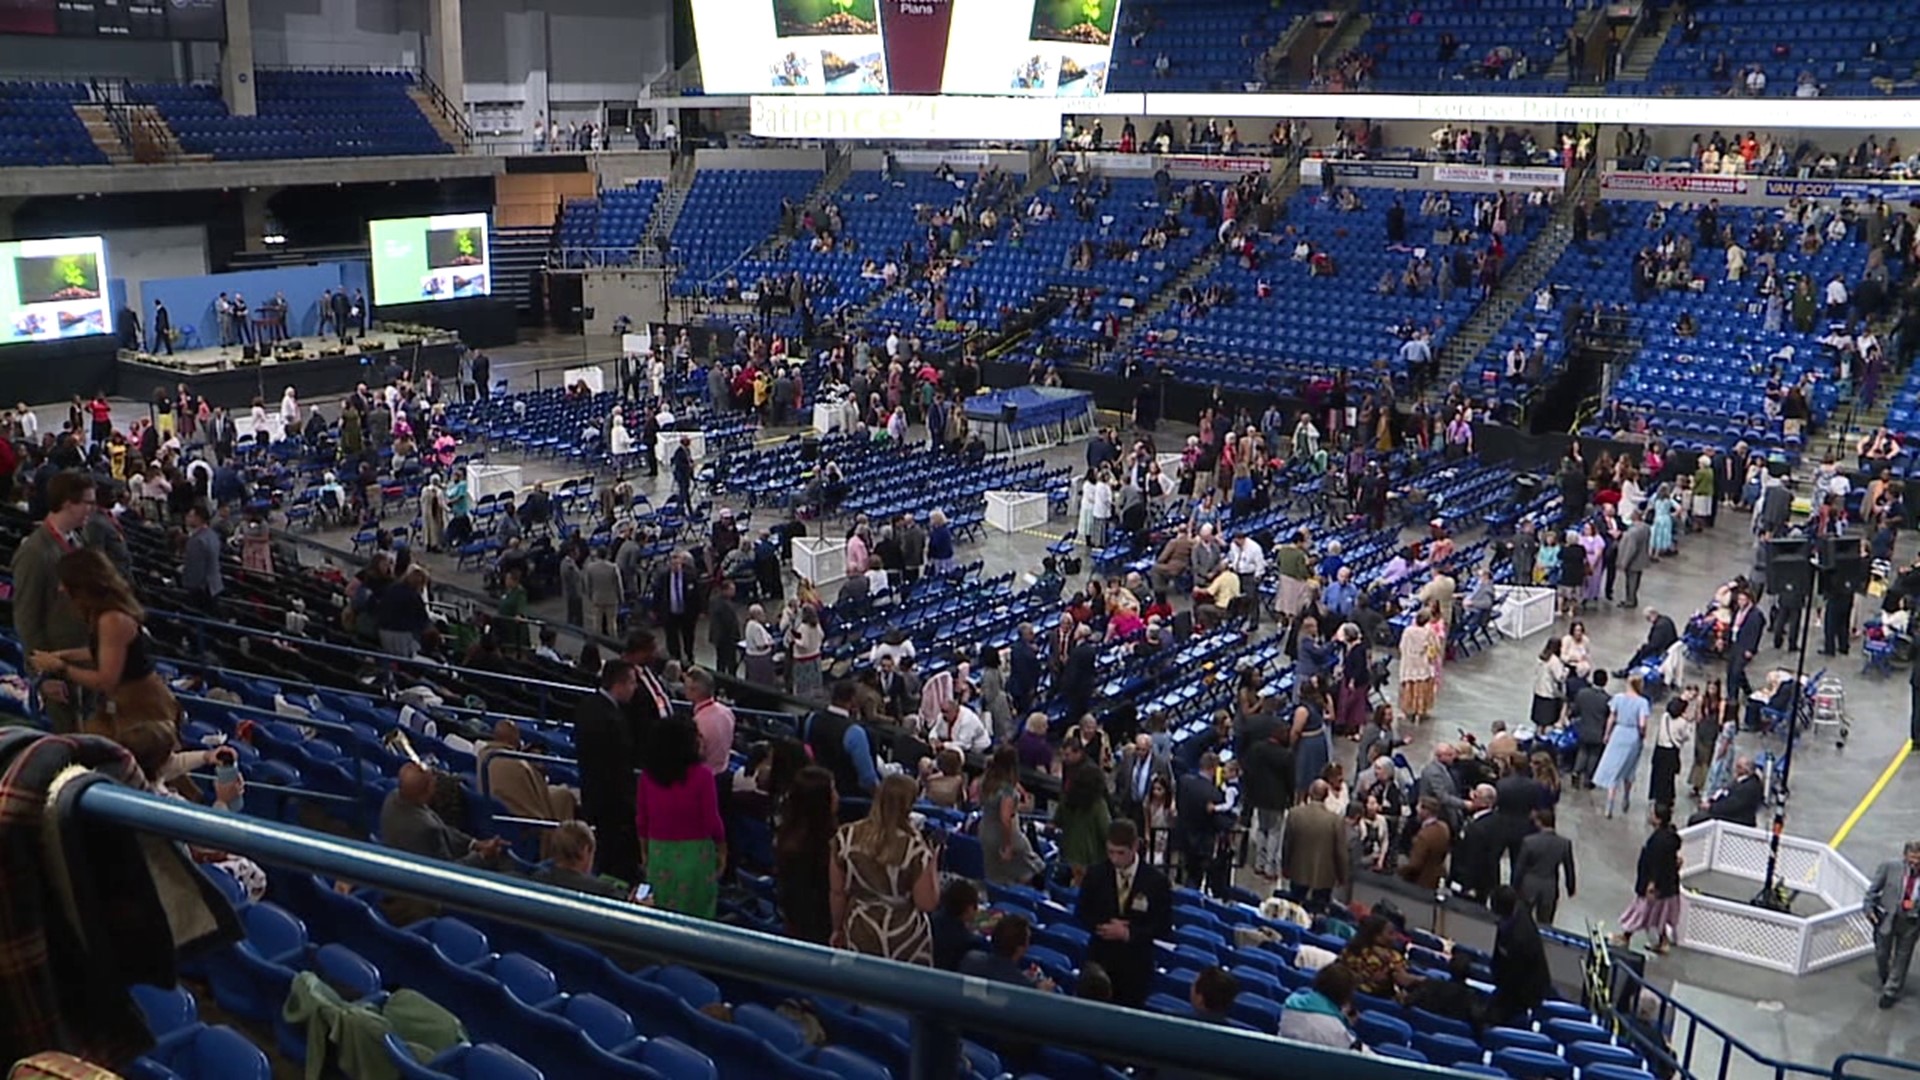 Jehovah's Witnesses convention returns to Luzerne County